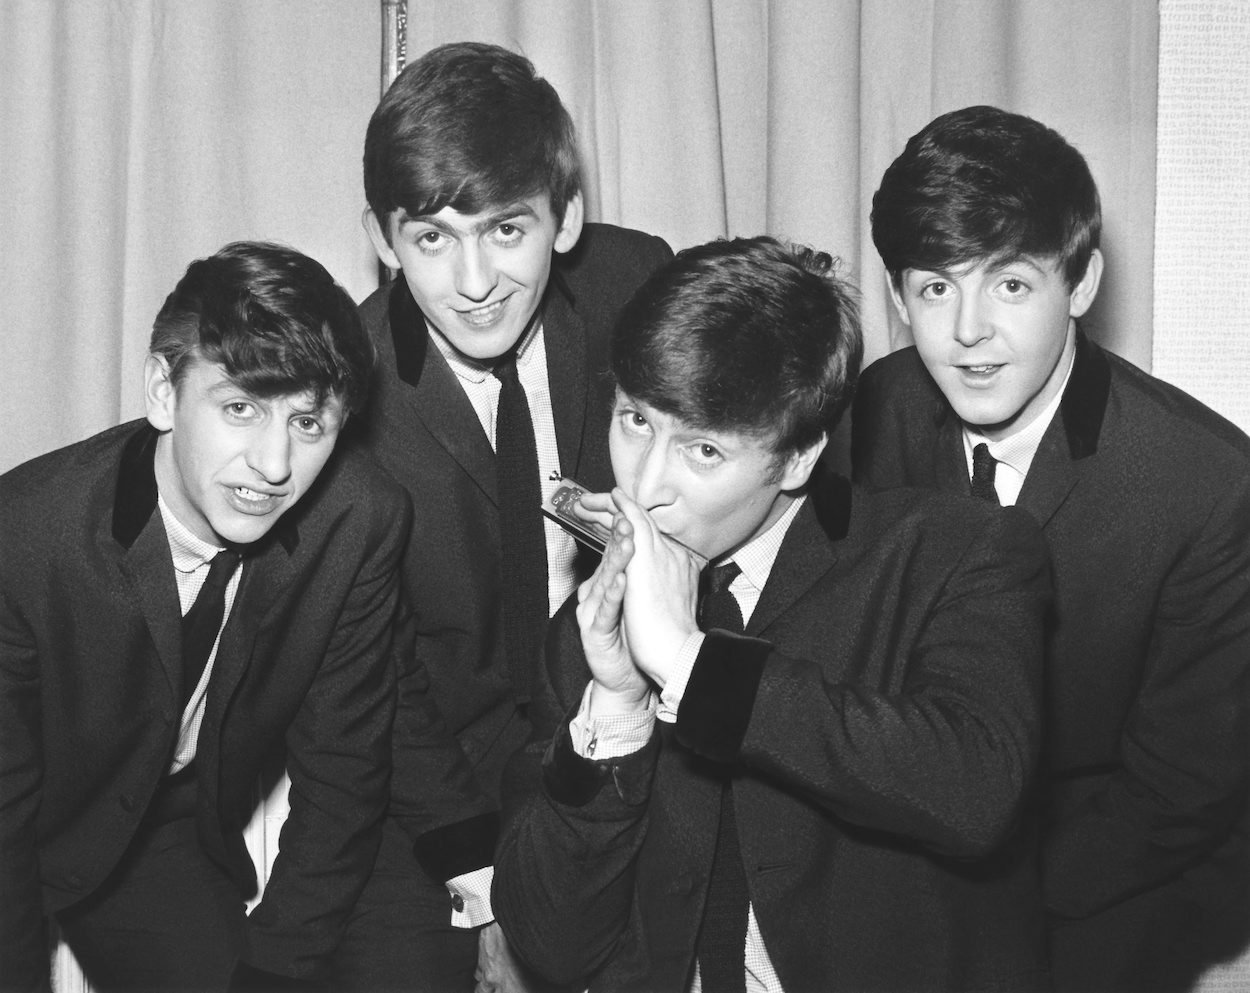 The Beatles, who released a hit song initially called "organ grinder music" by a club owner, in 1962: Ringo Starr (from left), George Harrison, John Lennon, and Paul McCartney.